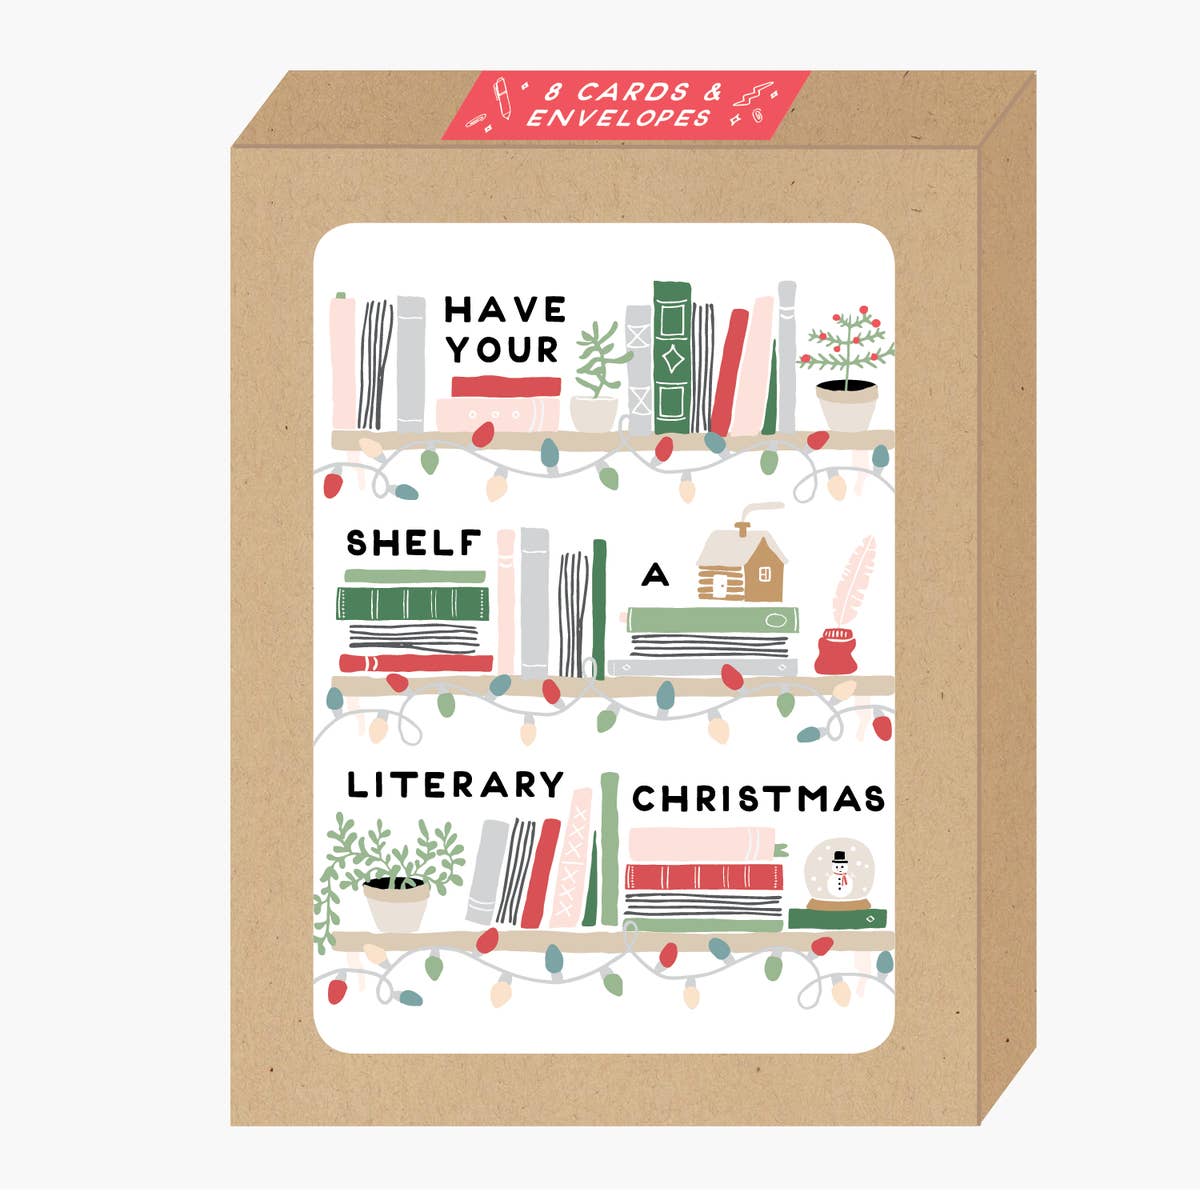 White background with image of bookshelves with books in green, red, pink, and black. Black text says, “Have your shelf a literary Christmas”. Envelopes are included. 